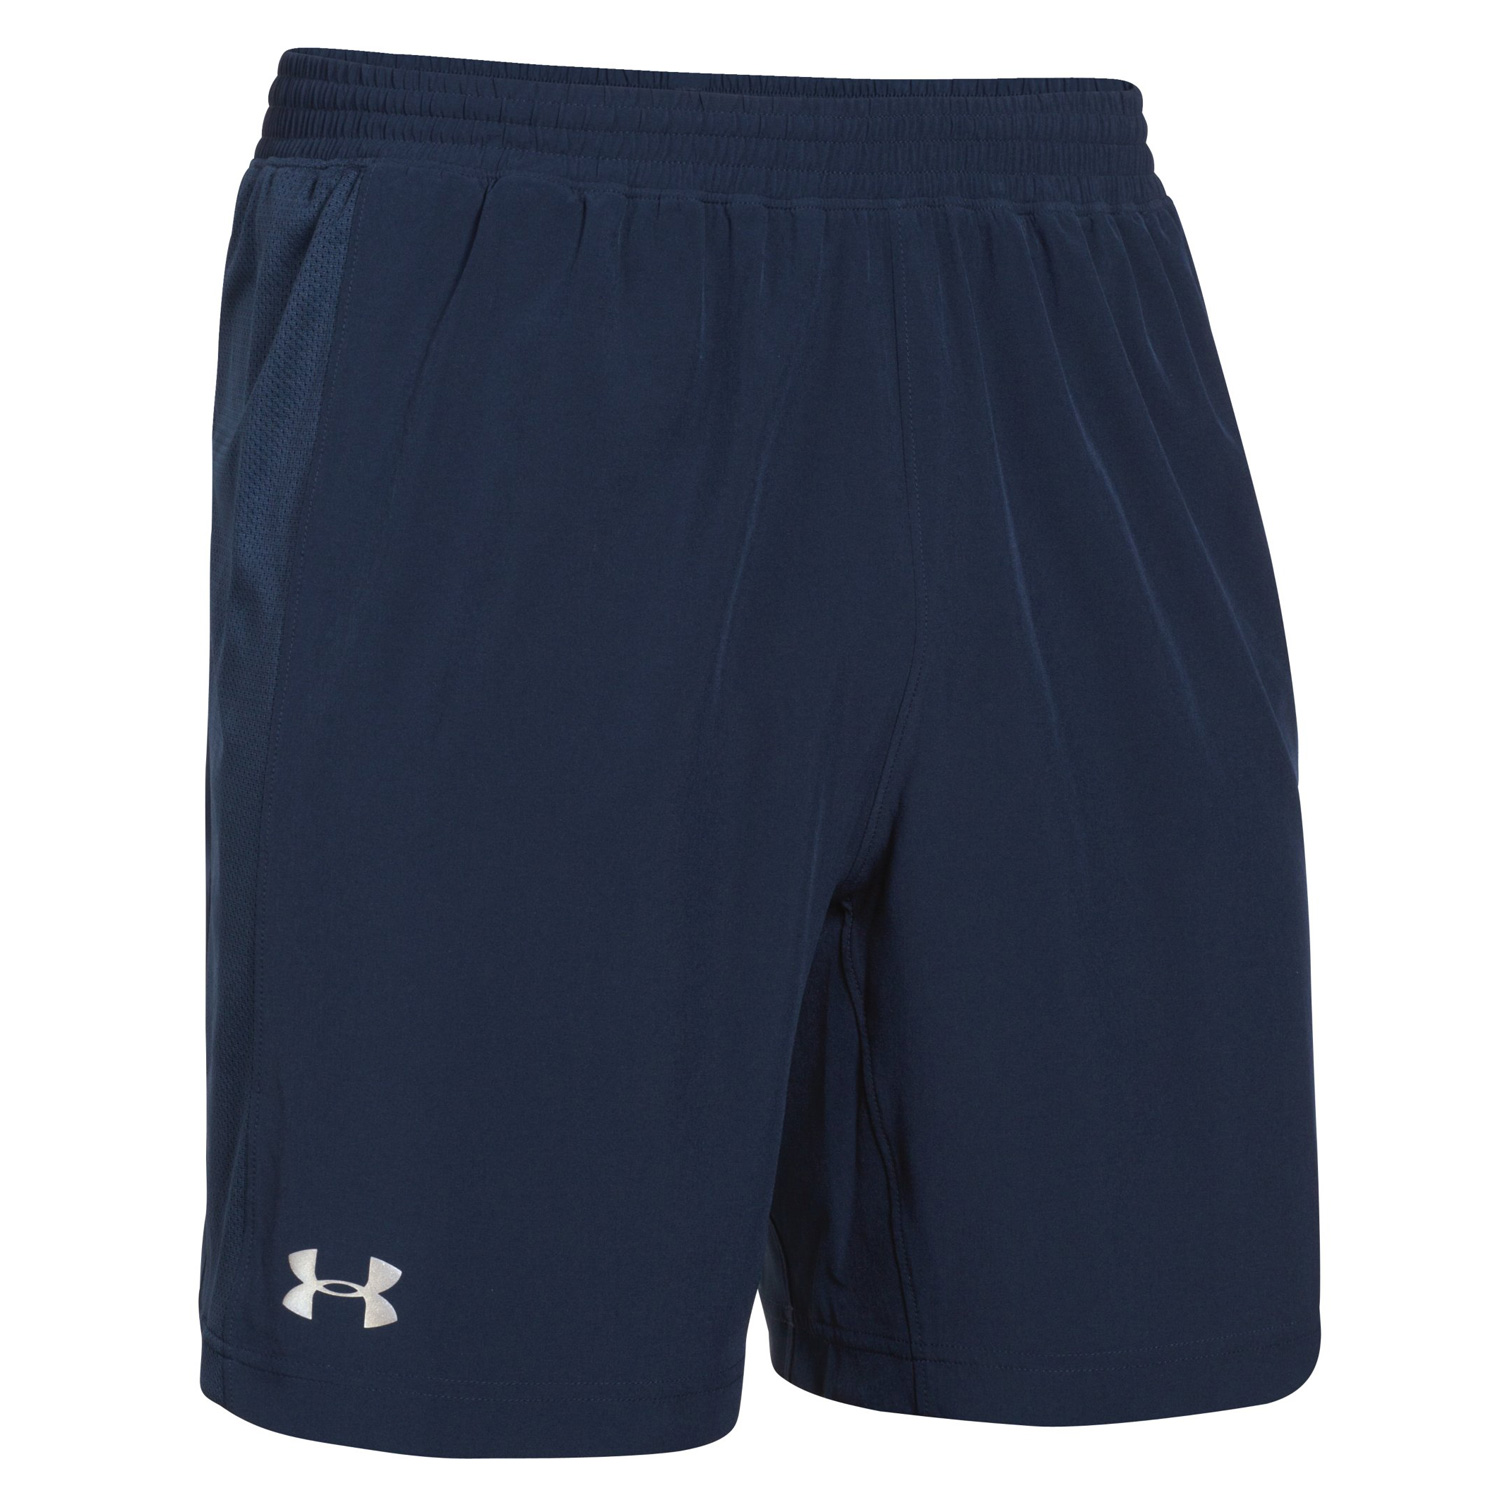 blue under armour shorts